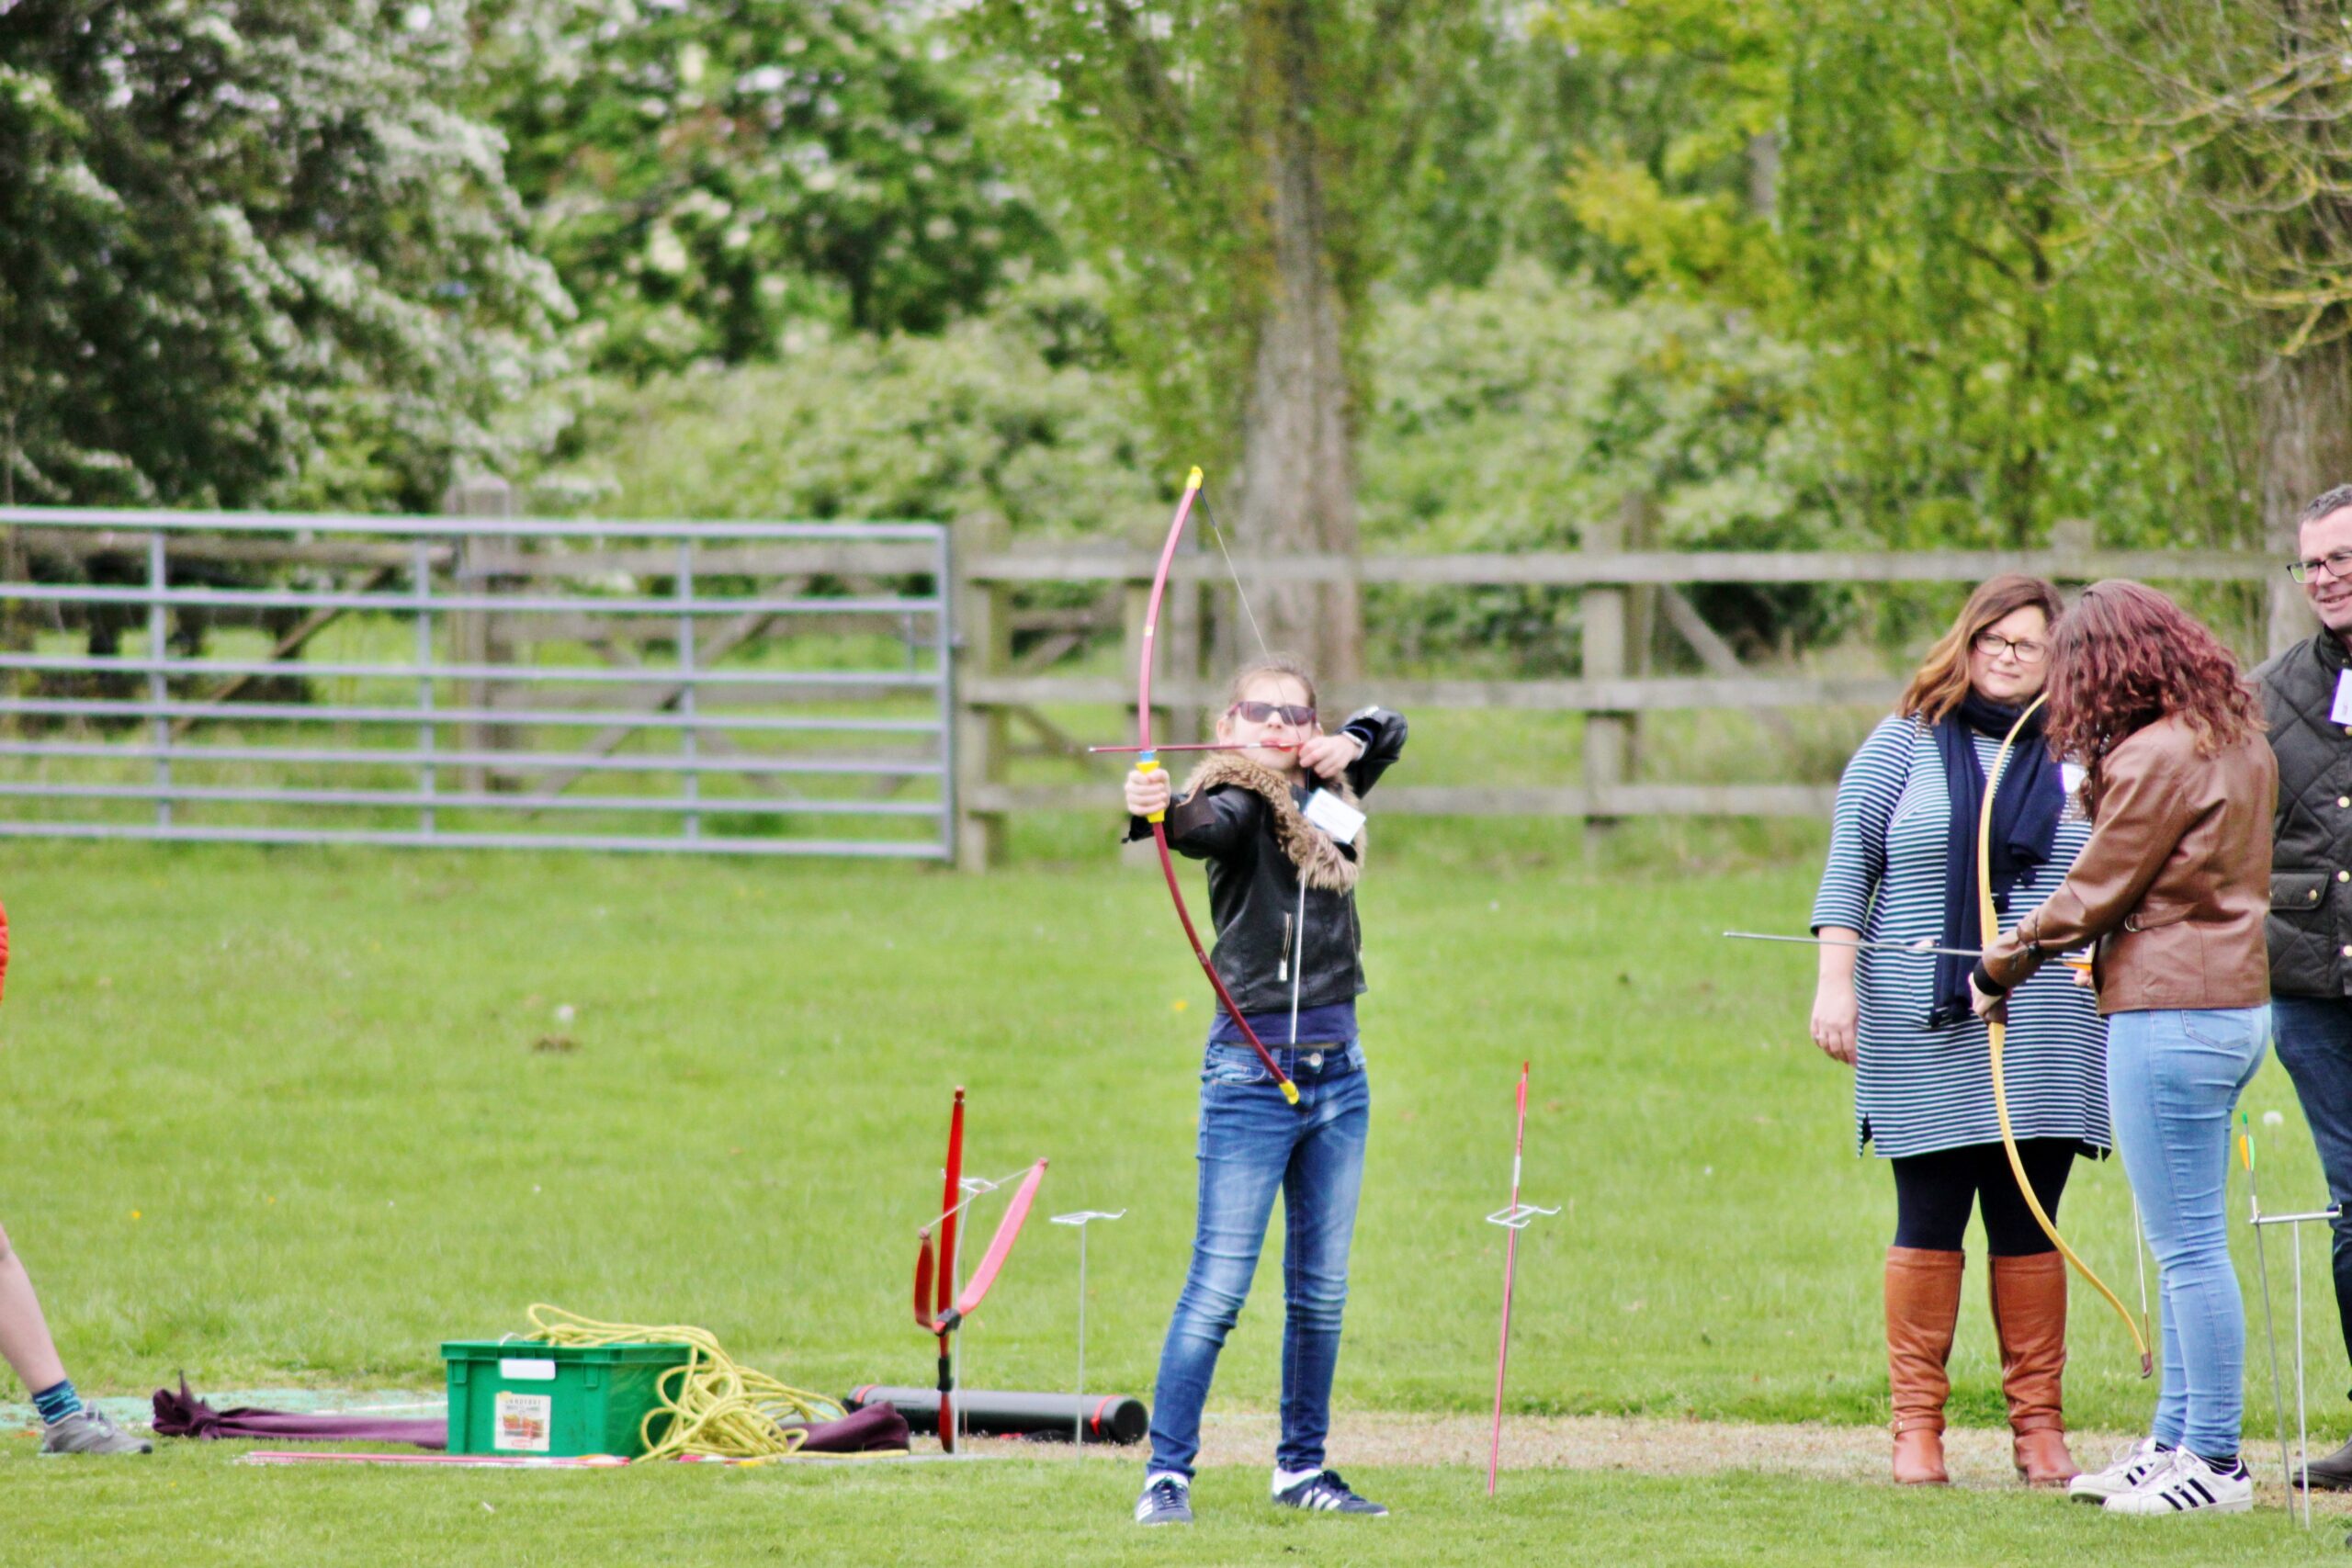 Young person doing Archery on the playing fields at NCW